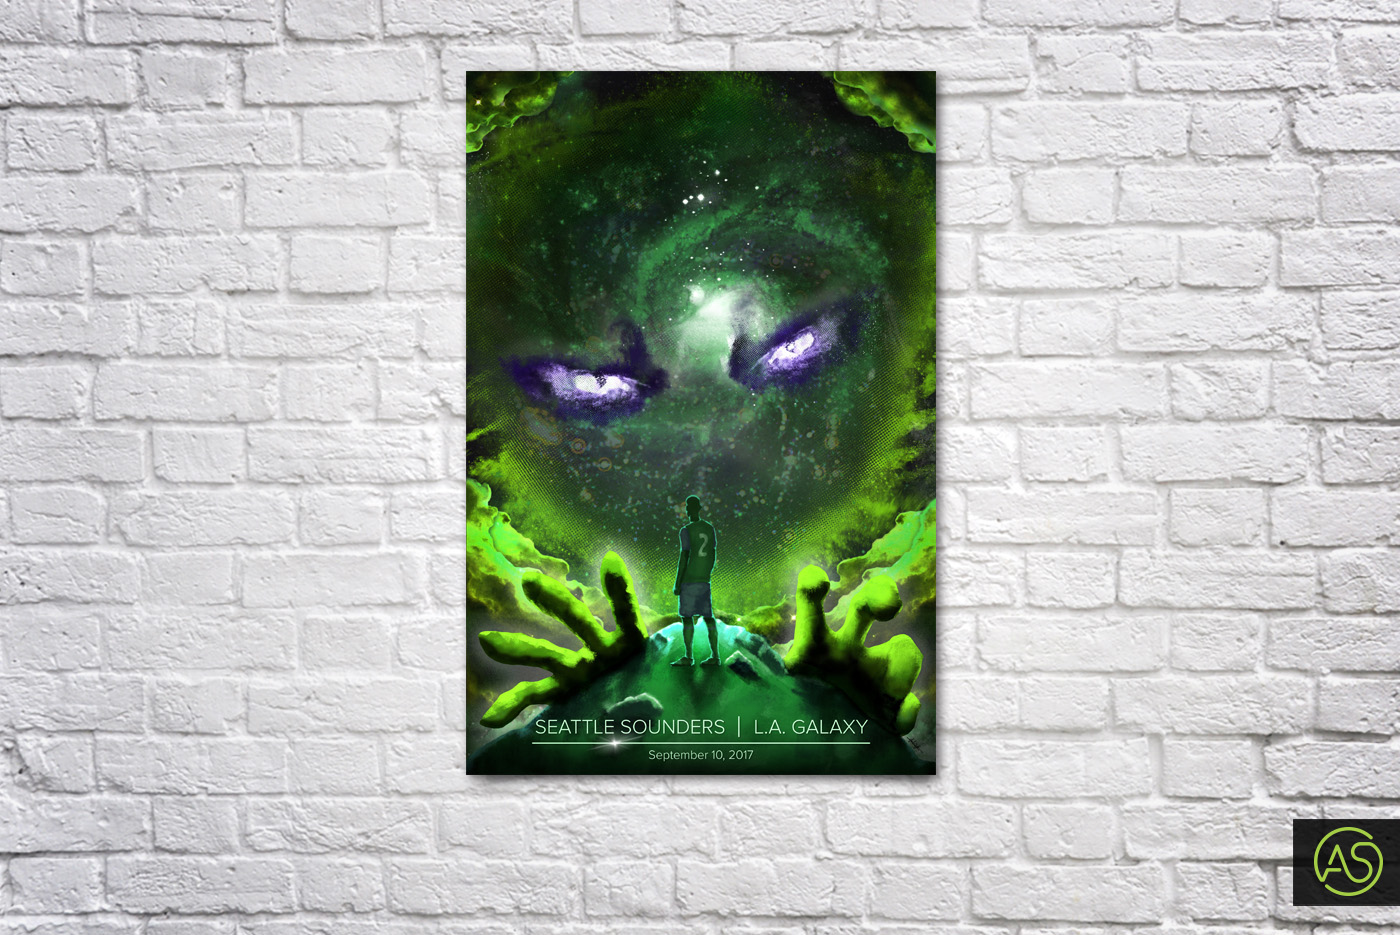 poster seattle sounders galaxy Space  mls soccer dempsey eyes rave green